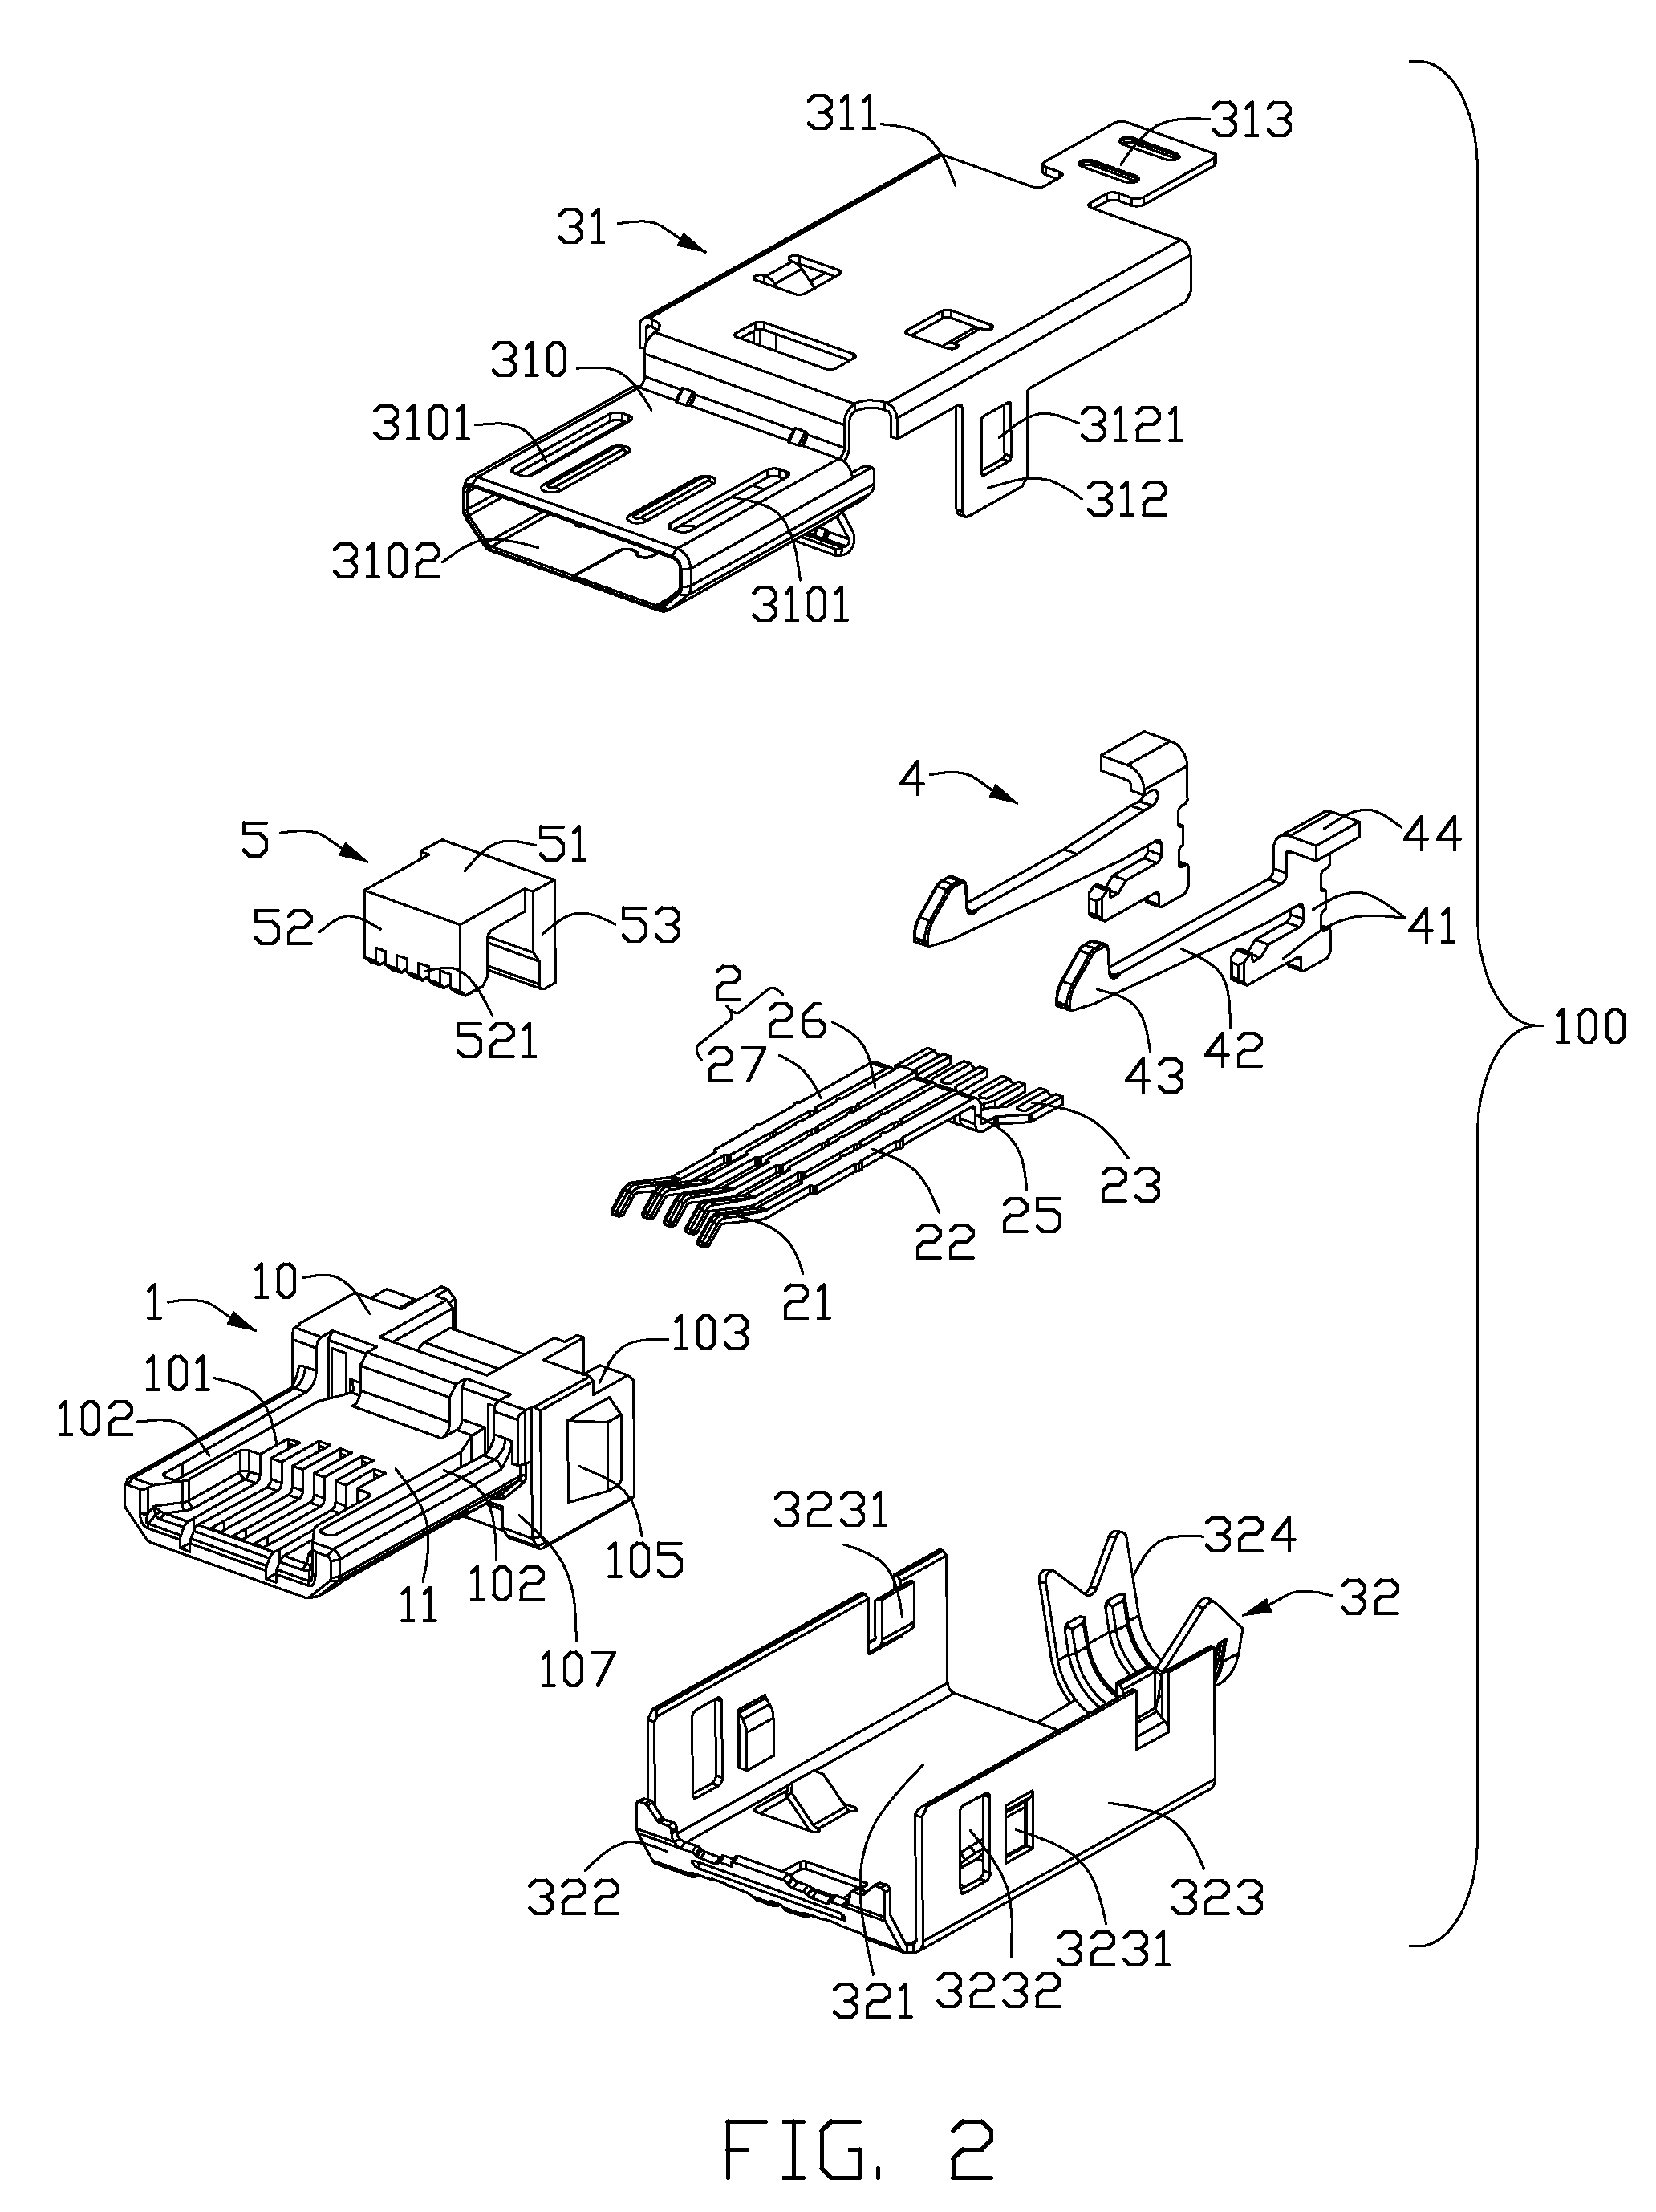 Cable connector assembly with an improved spacer